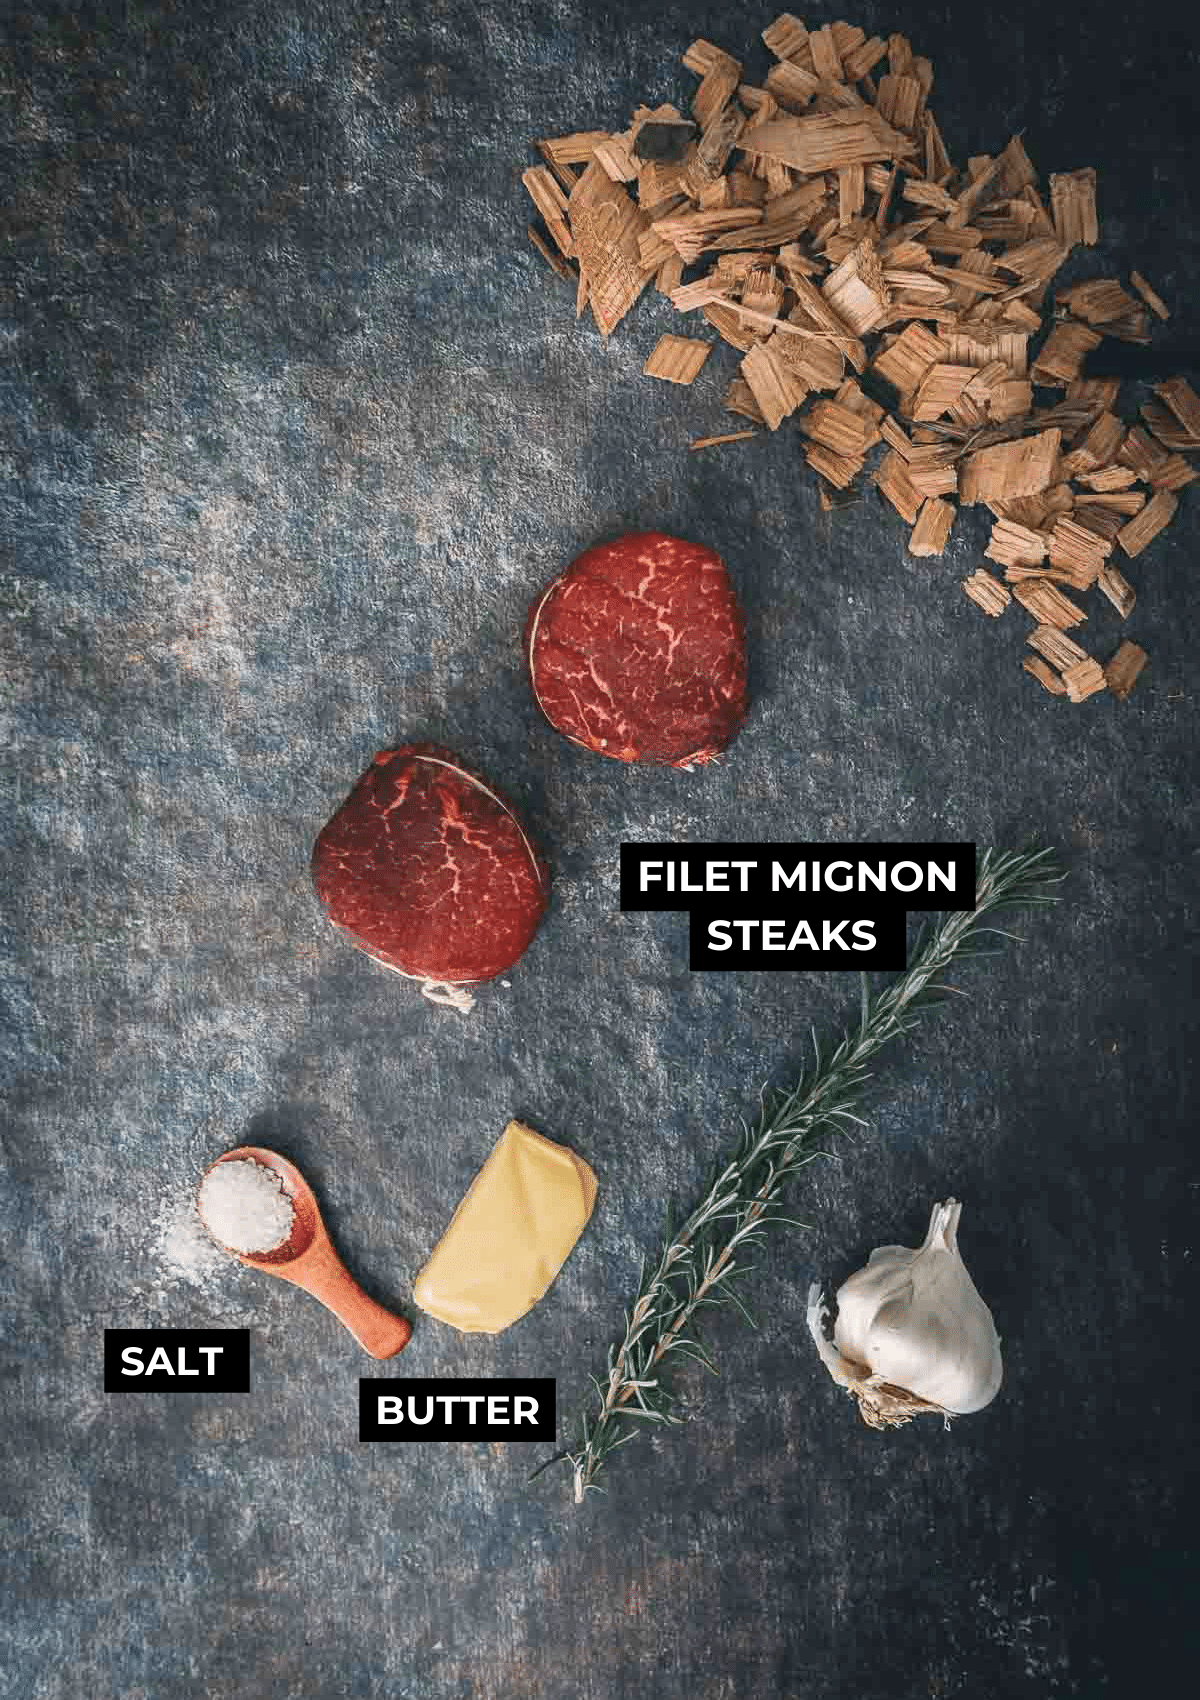 Ingredients for this grilled steak recipe.